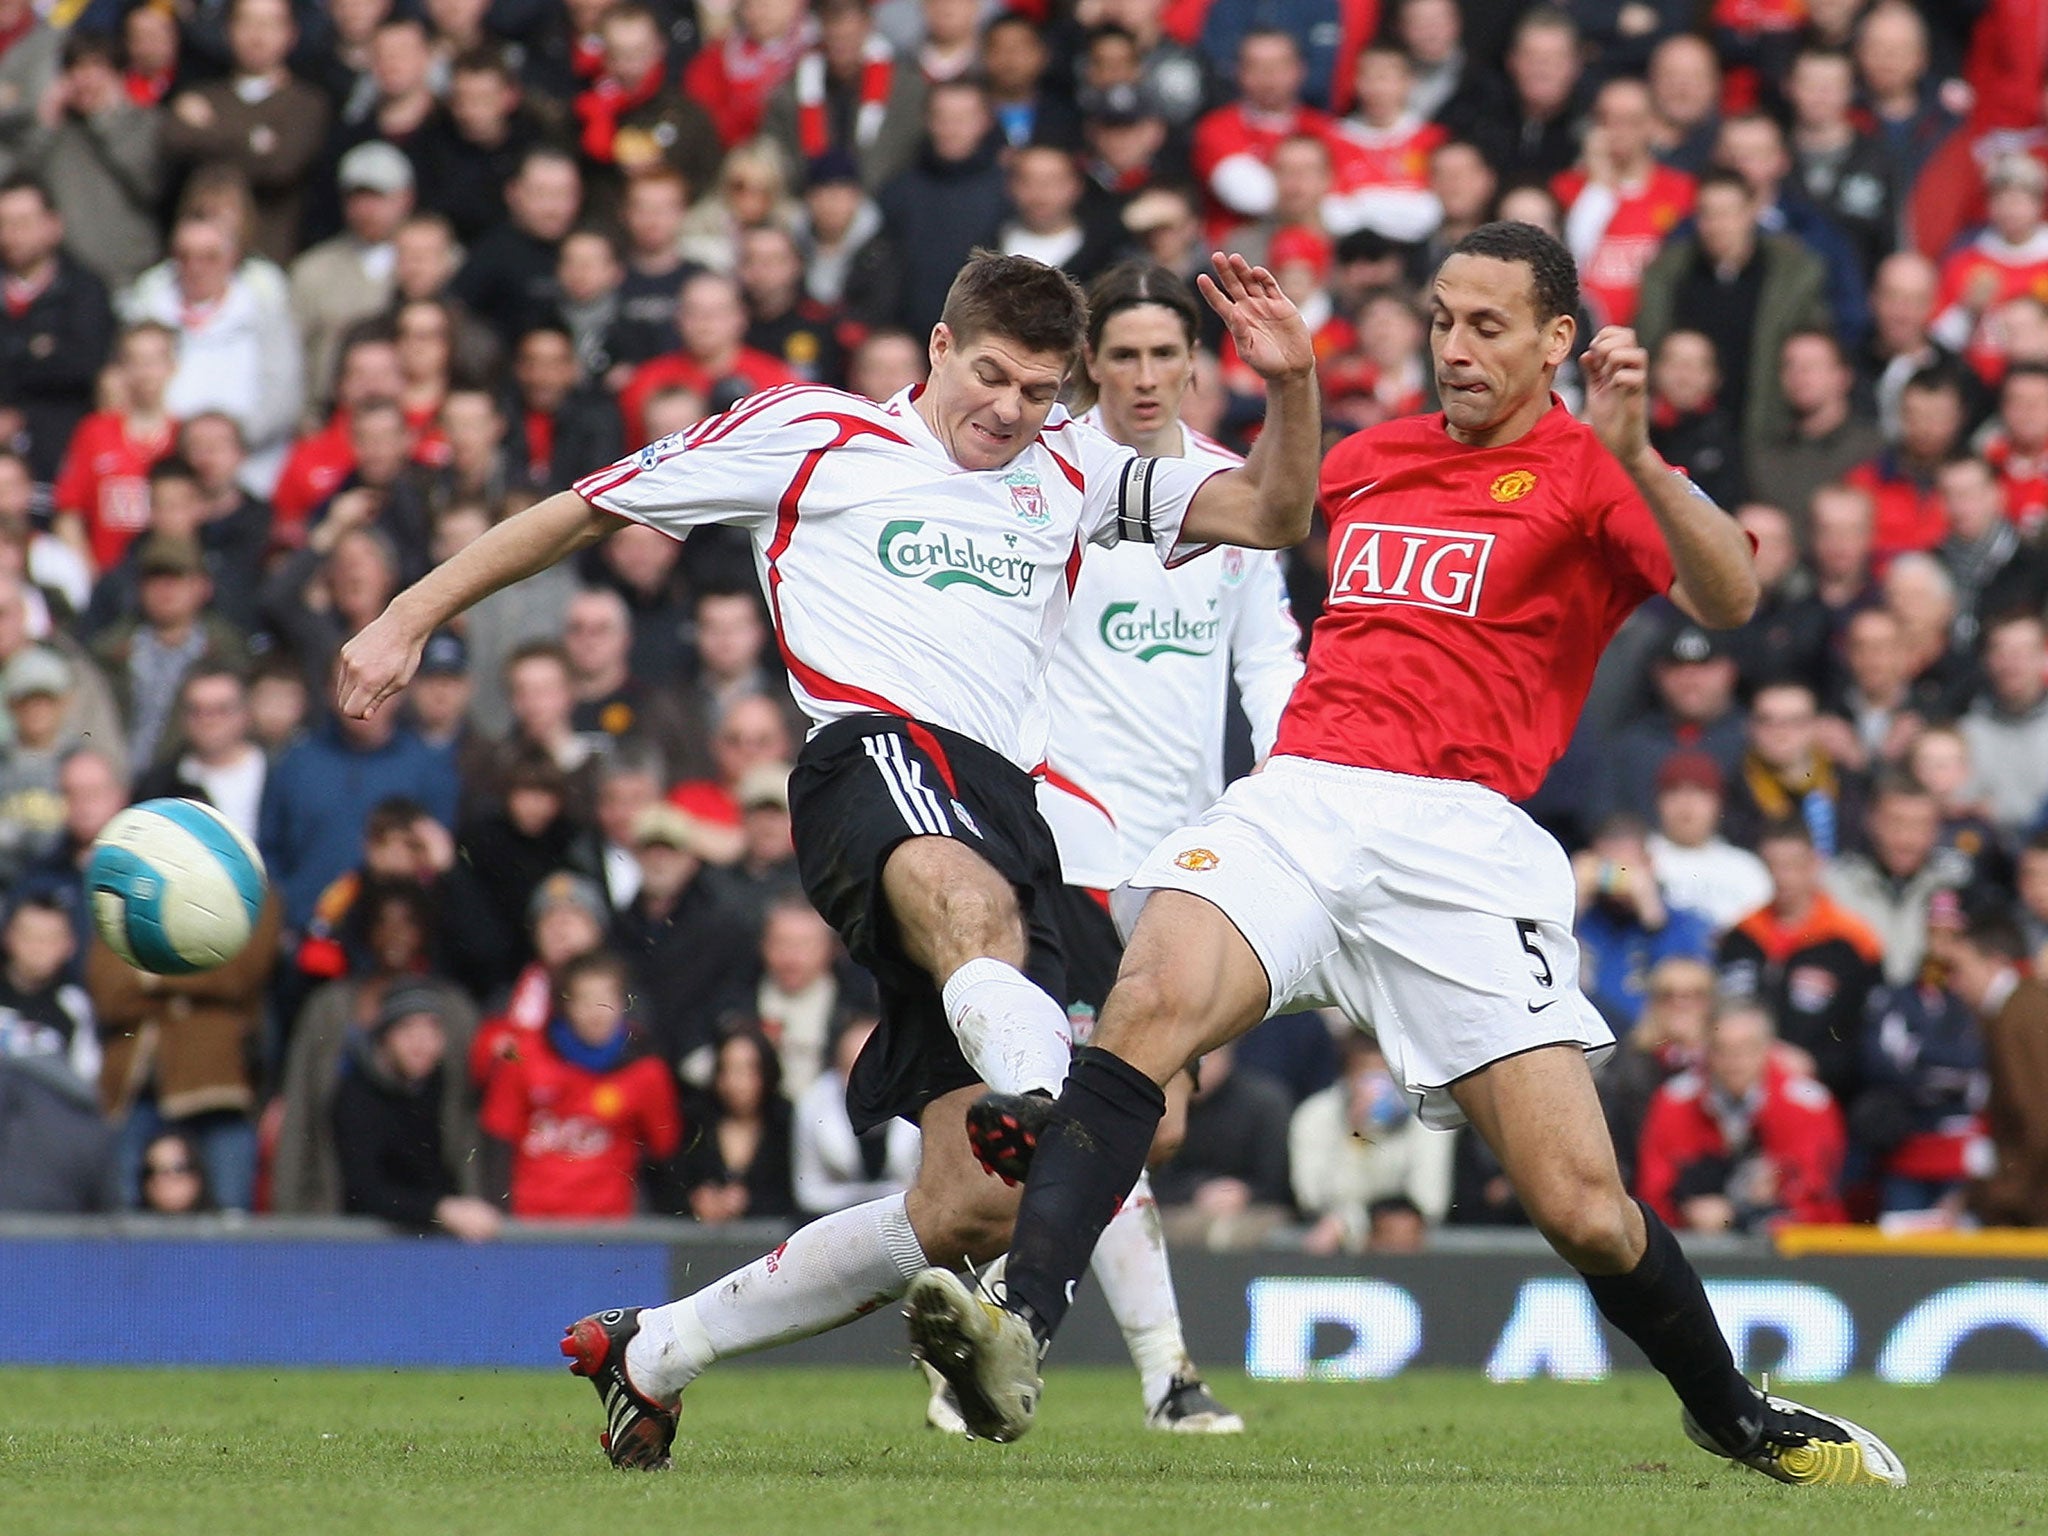 Steven Gerrard puts in a dangerous tackle on Rio Ferdinand during a match between Liverpool and United in 2008